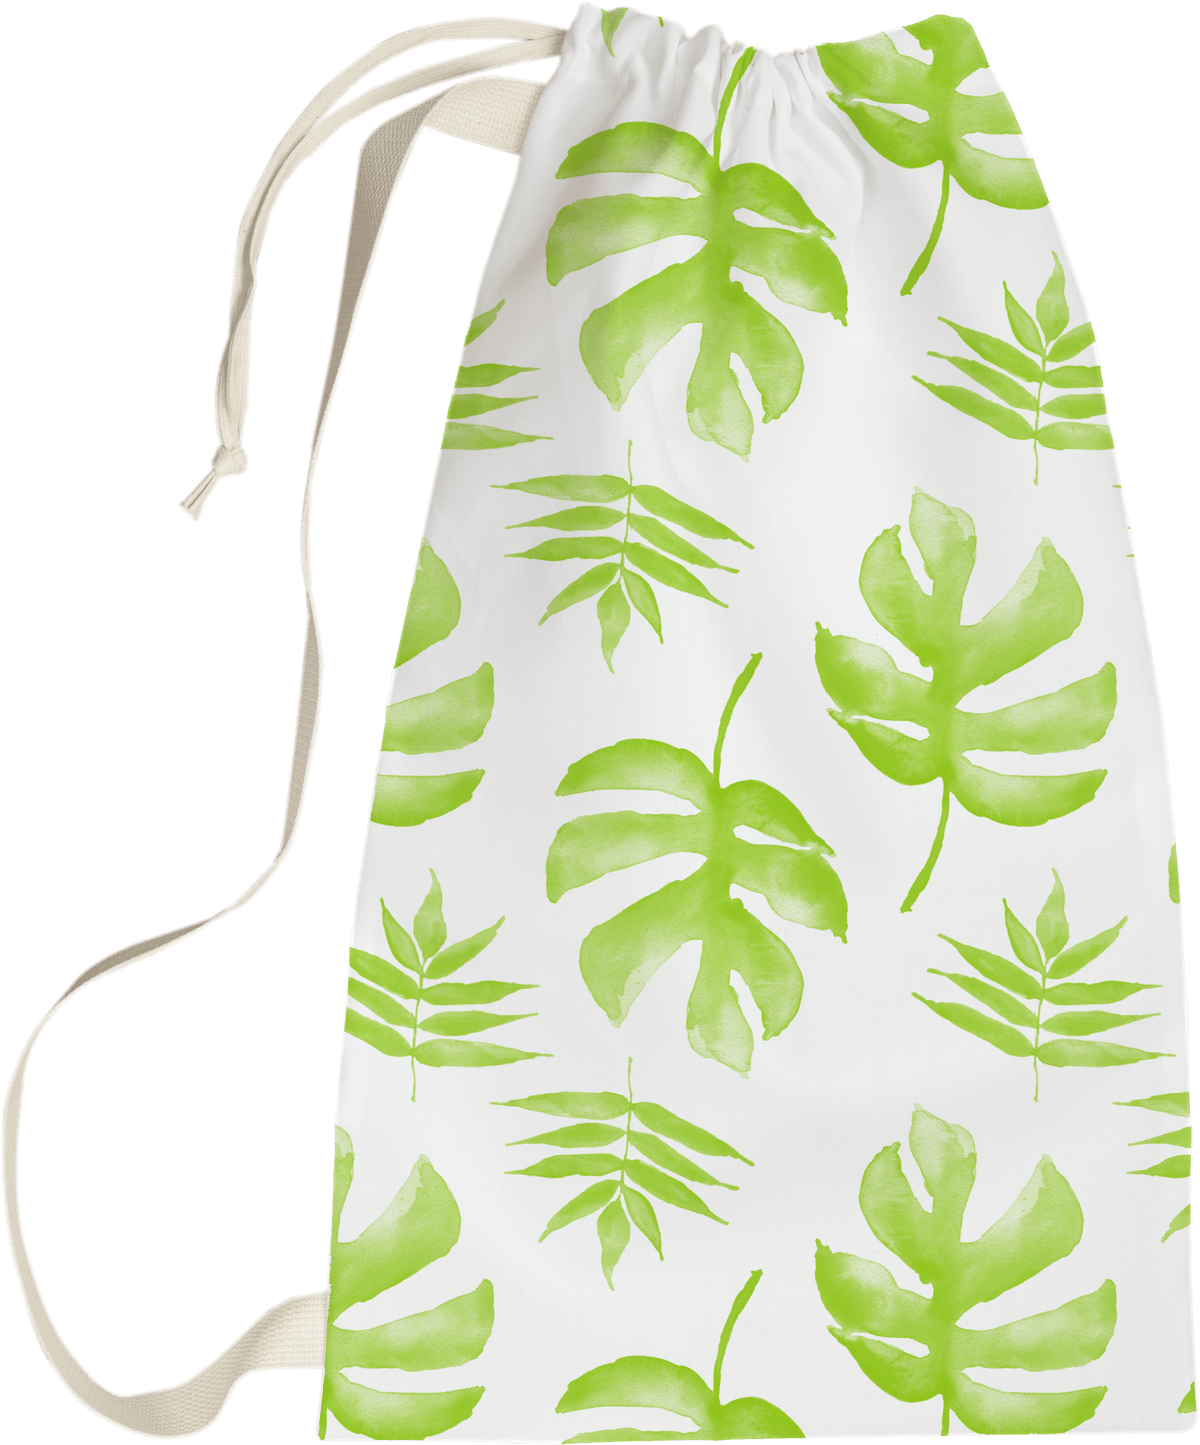 Laundry Bag - Palm Beachy Lime Room Accessories, Laundry Bags MWW 